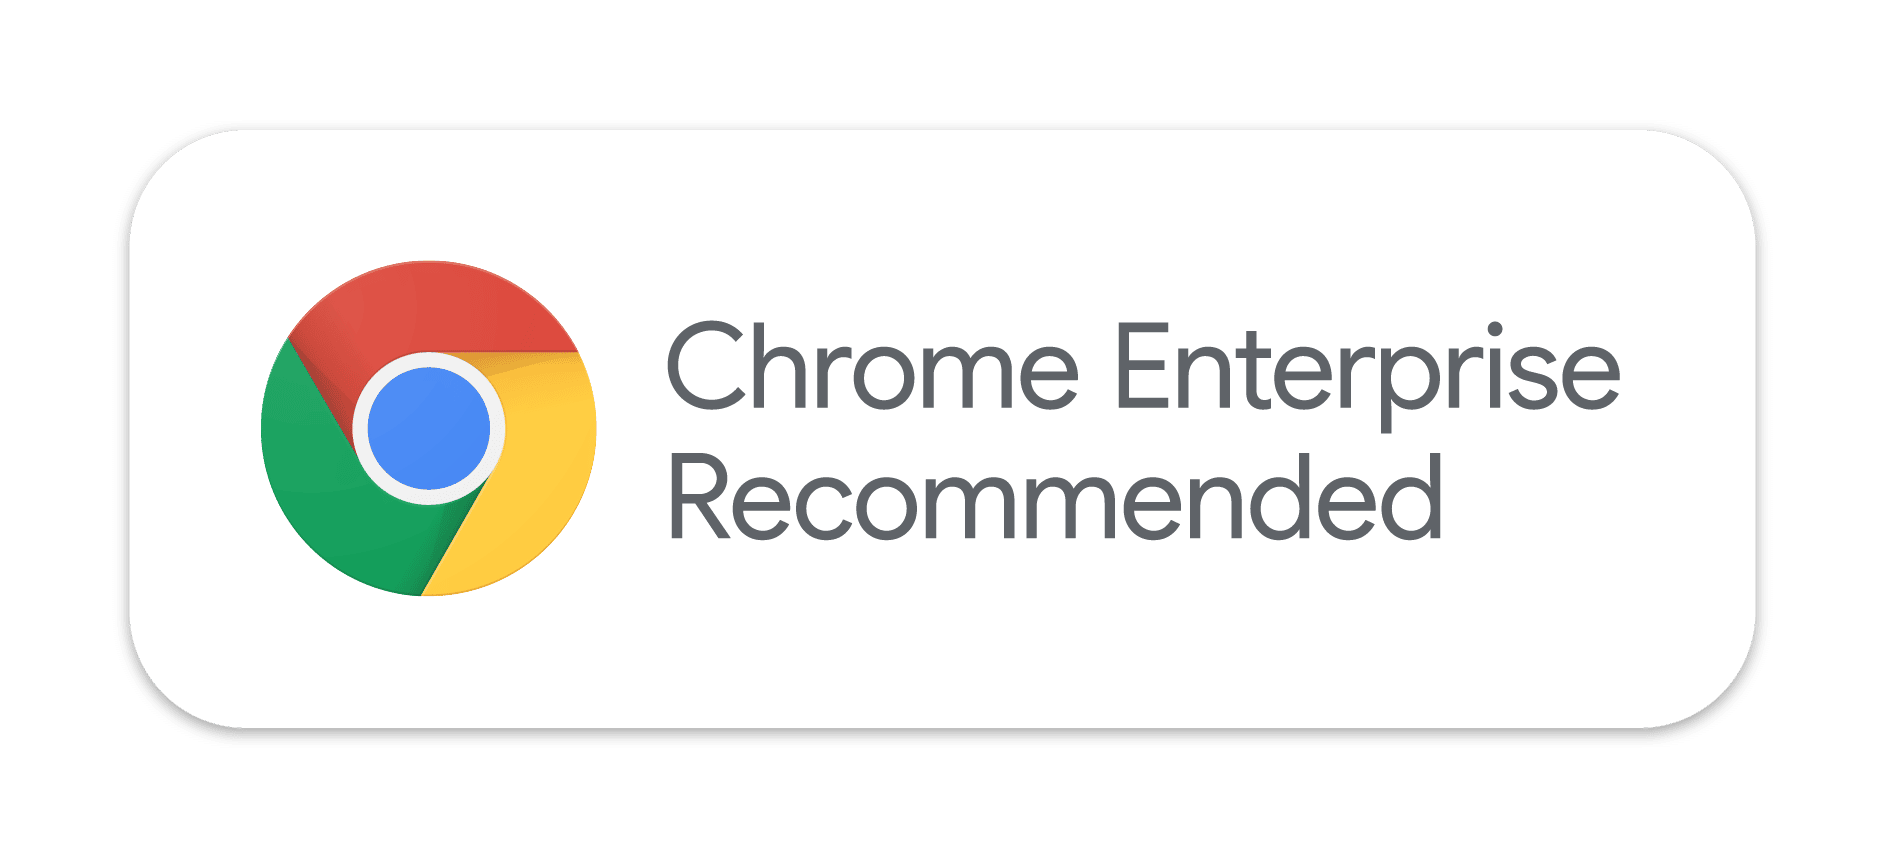 A badge from google with the chrome icon, and text that reads Chrome Enterprise Recommended